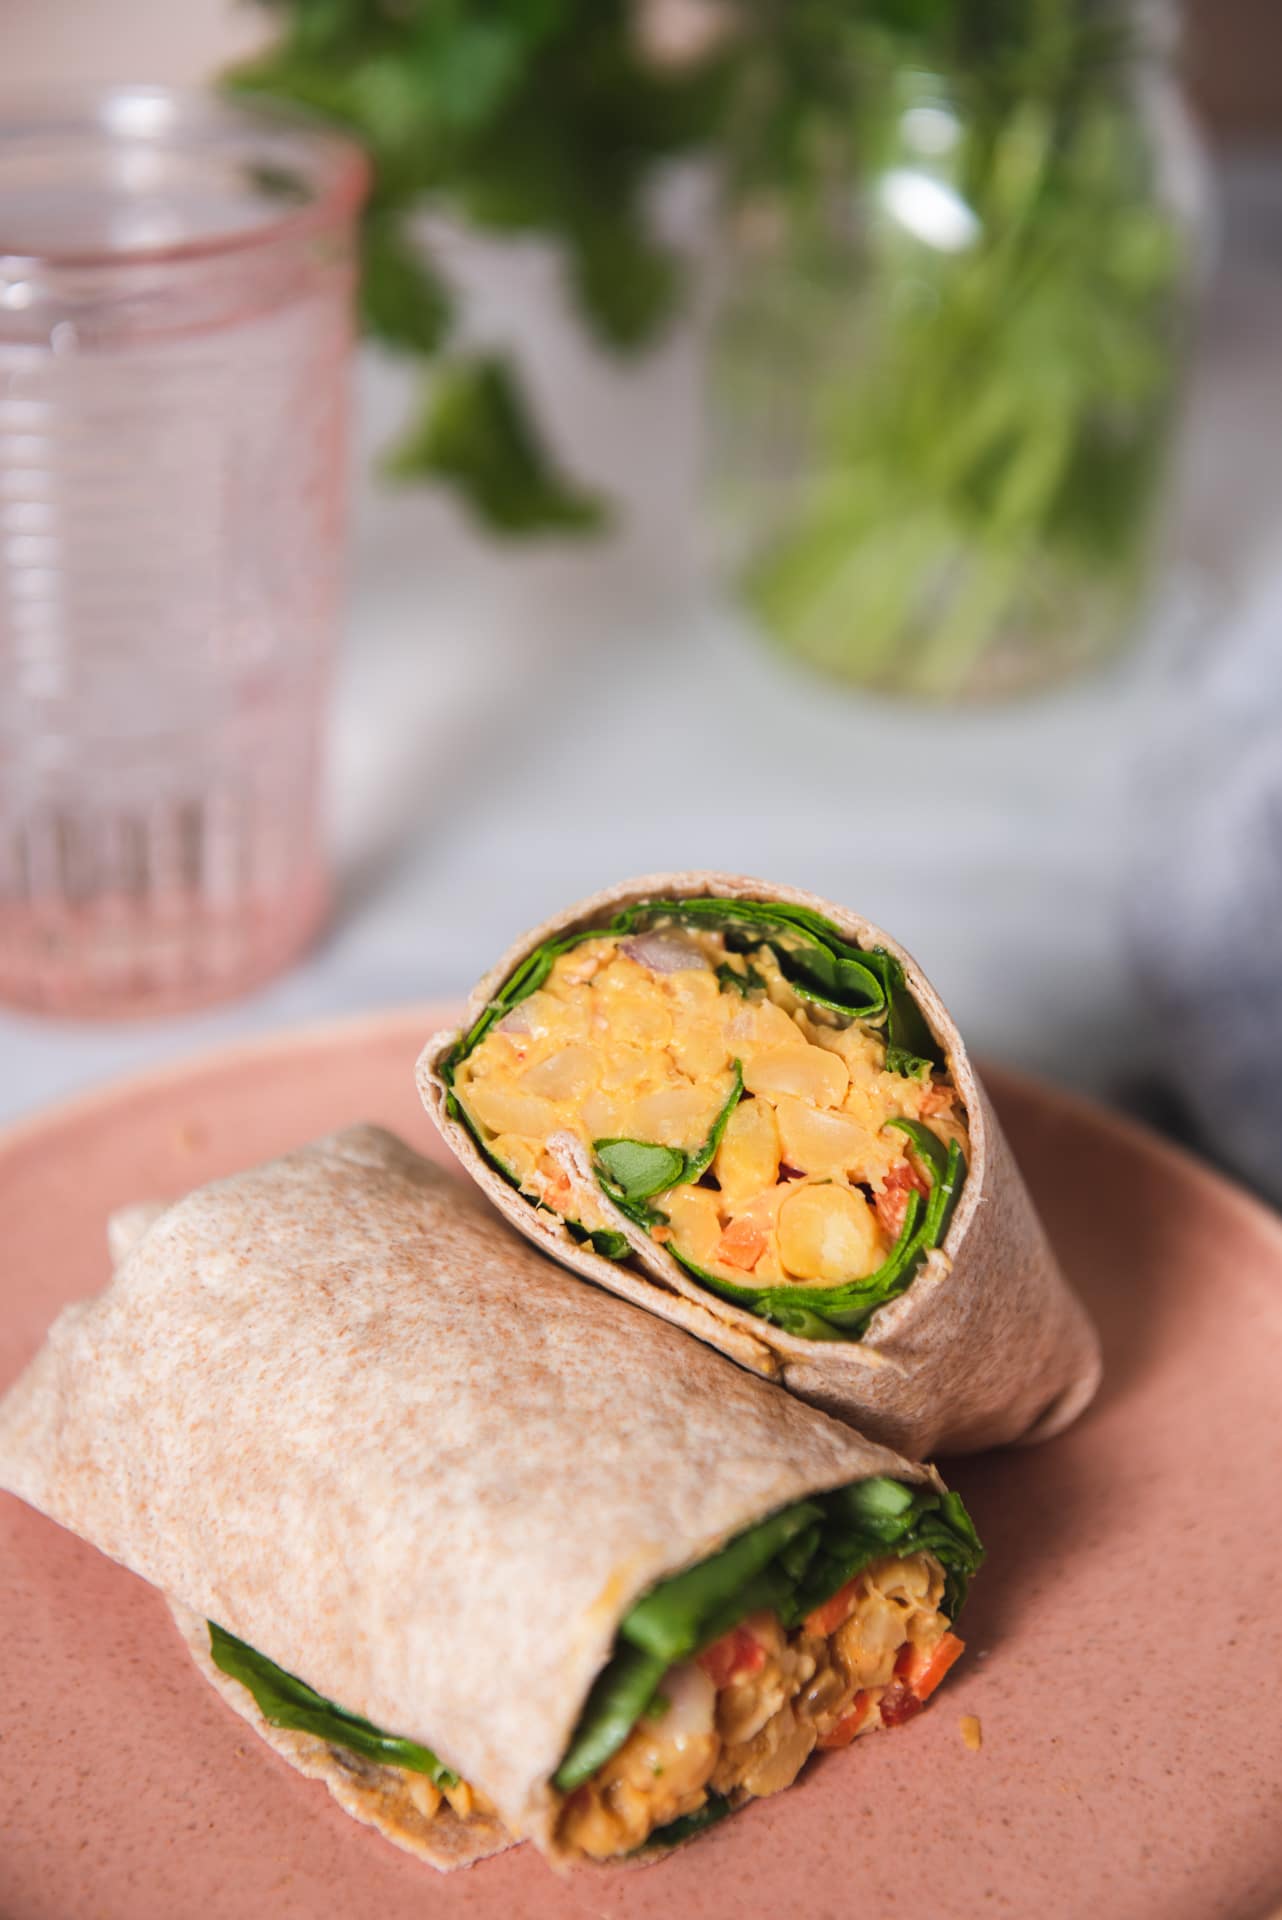 Two halves of a chickpea wrap on a pink plate/